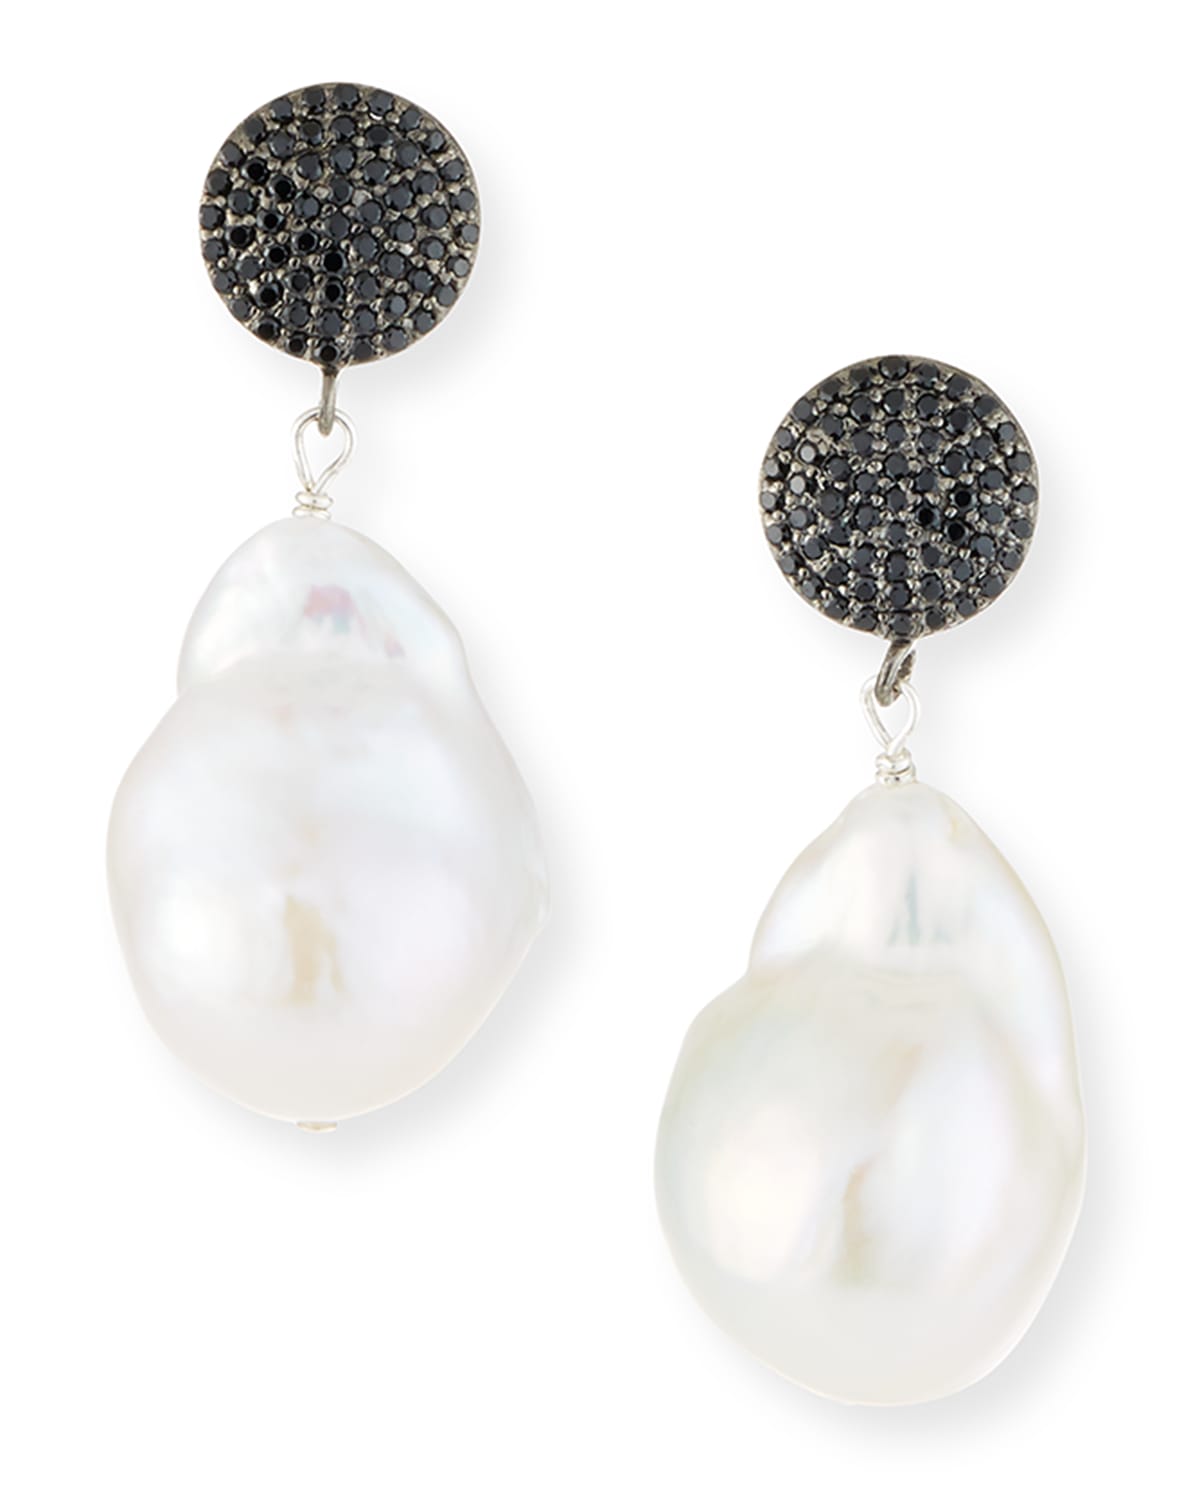 Margo Morrison Baroque Pearl Drop Earrings with Black Spinel